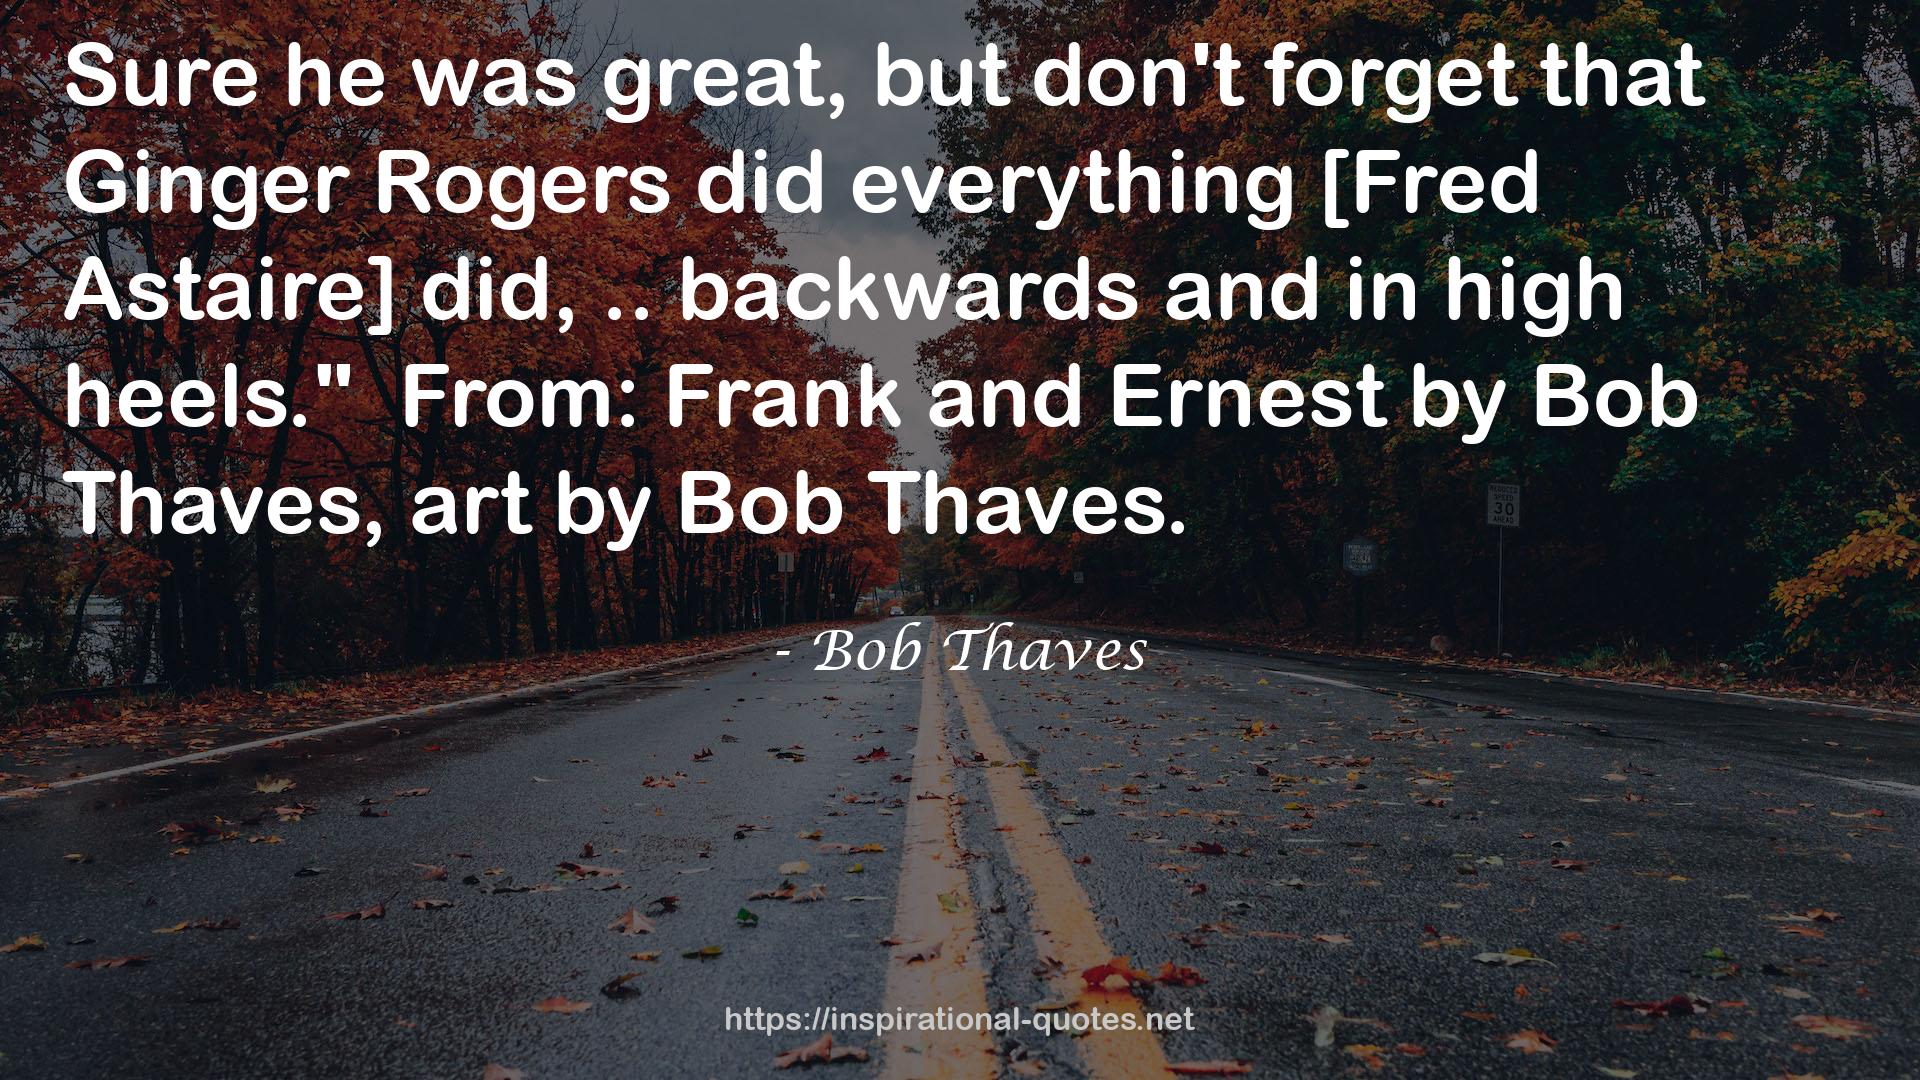 Bob Thaves QUOTES